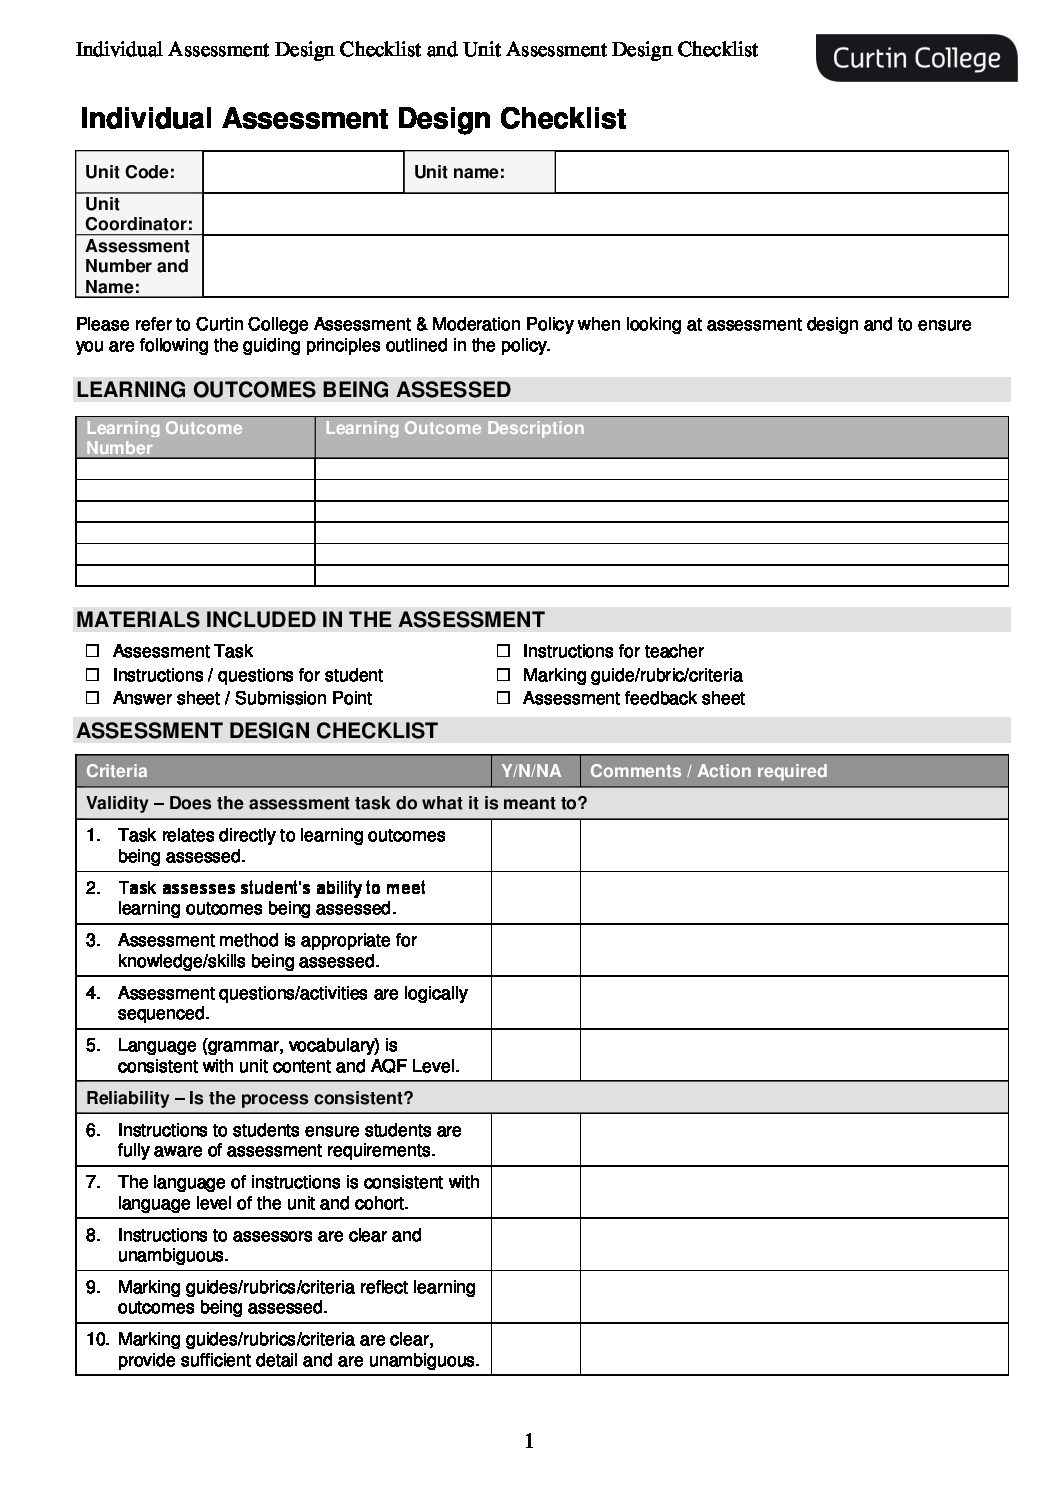 Individual and Unit Assessment Design Checklist